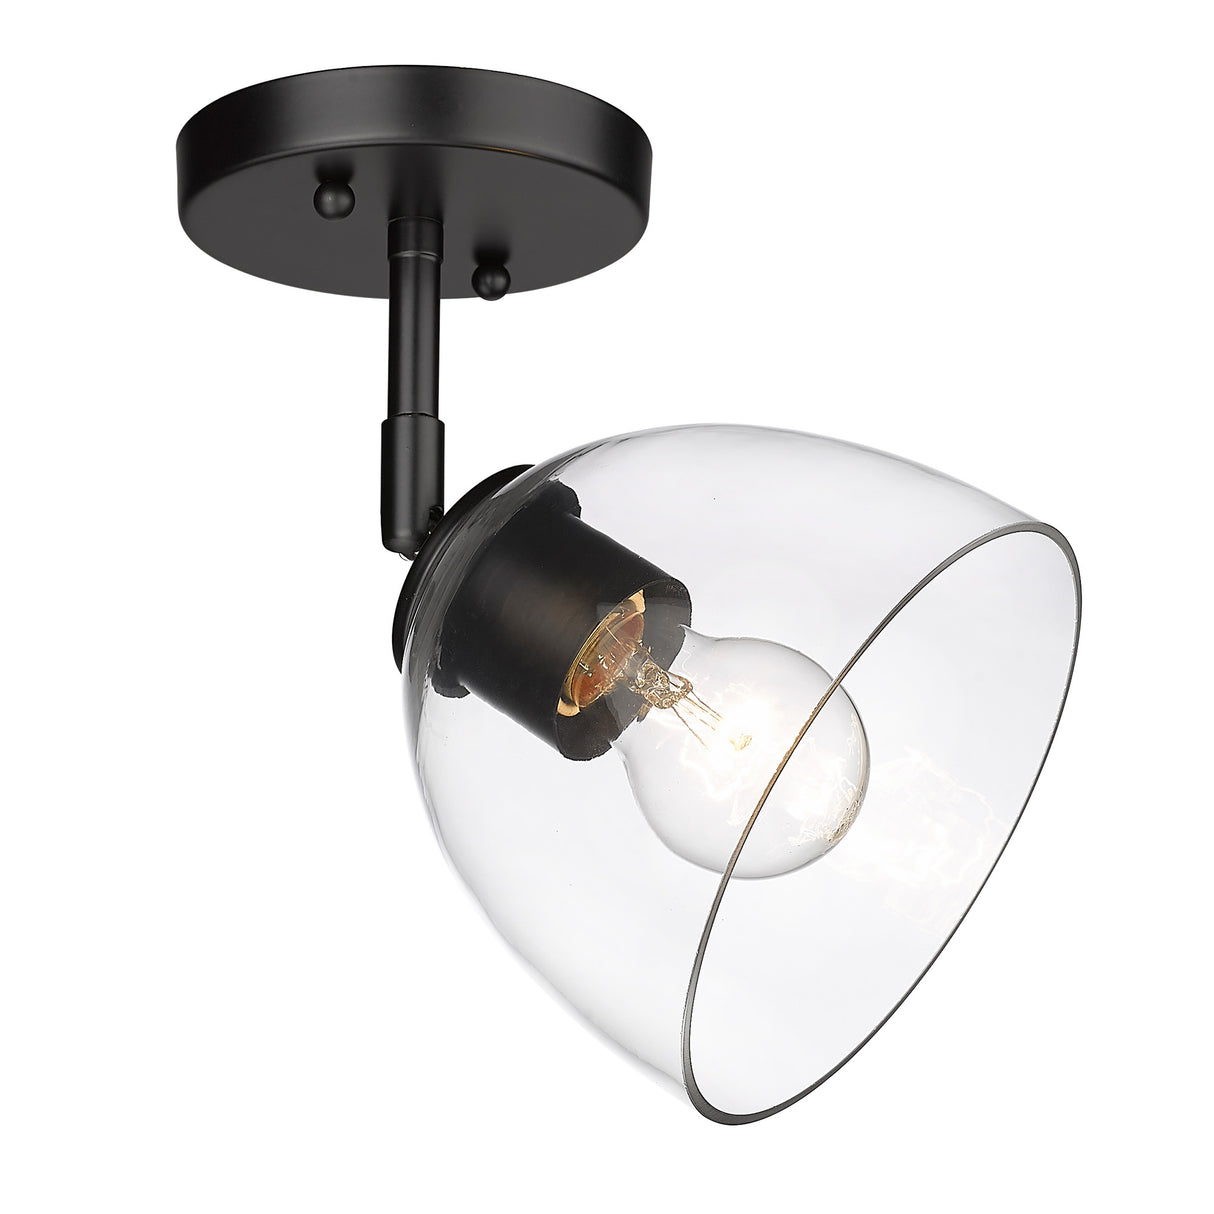 Roxie 1 Light Wall Sconce in Matte Black with Matte Black Accents and Clear Glass Shade